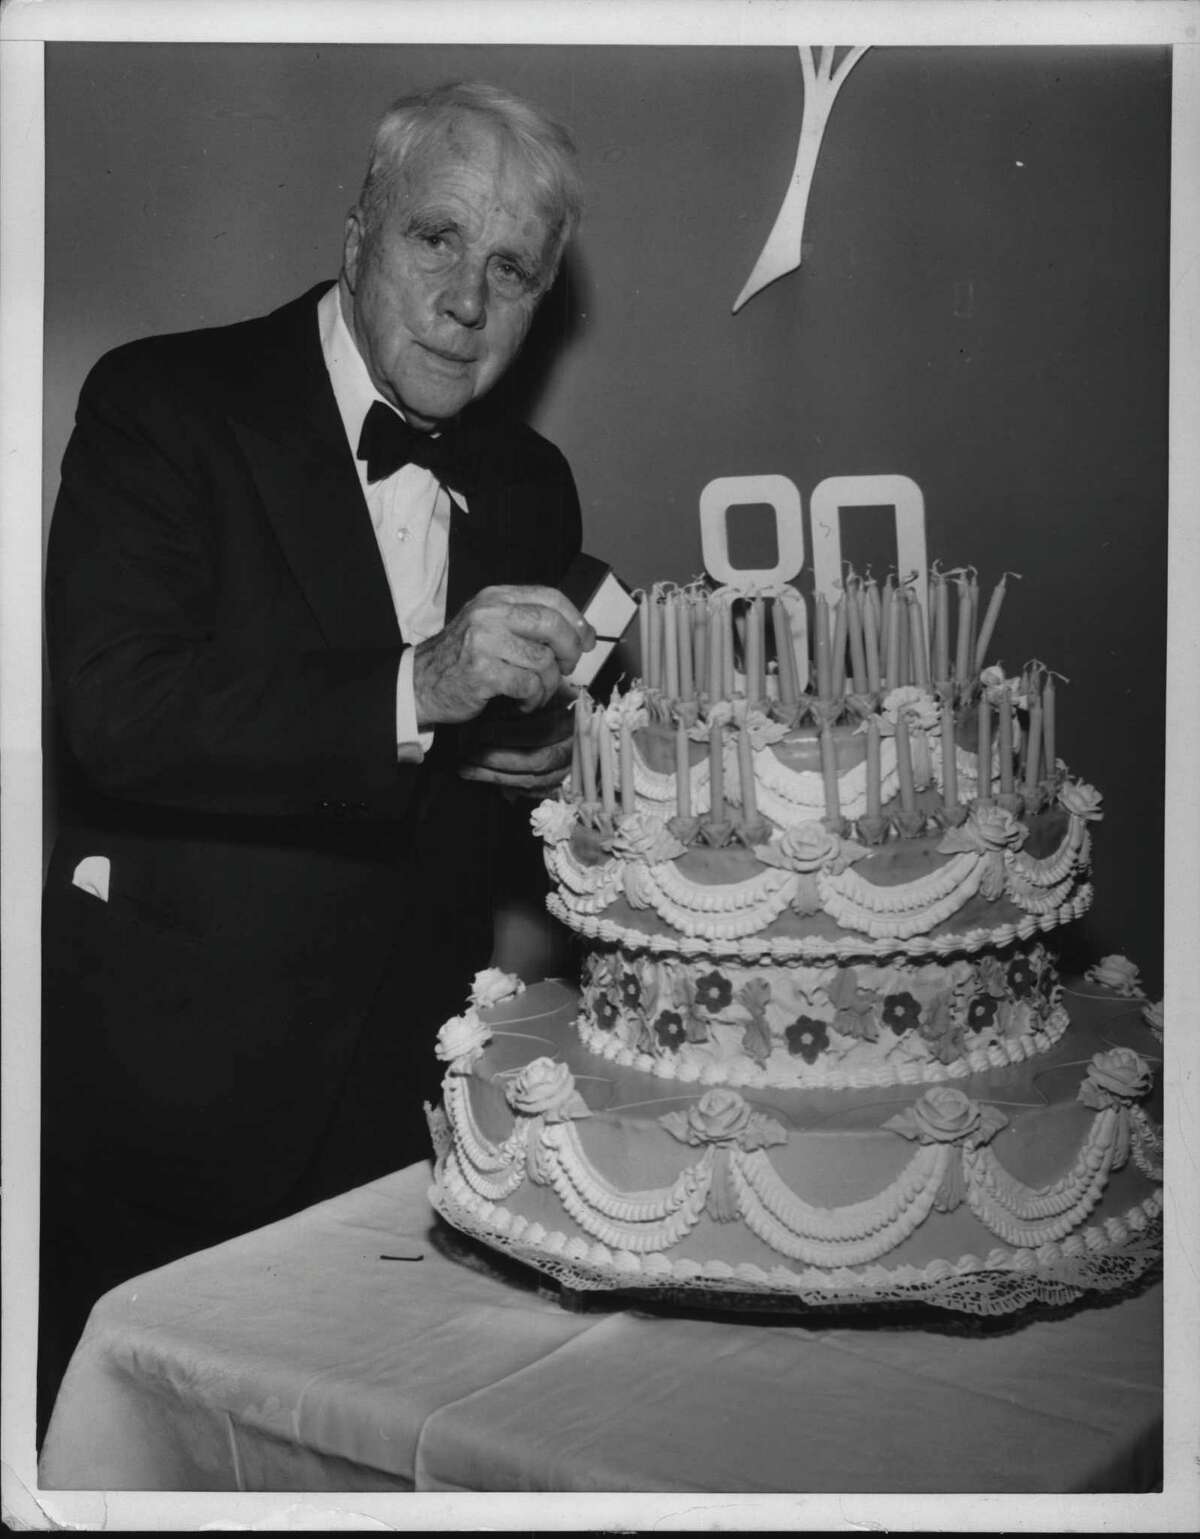 New York - Robert Frost, four time Pulitzer Prize winner and one of America's most noted living poets, prepares to light the candles on his birthday cake at a party given him by Edgar T. Rigg, President of Henry Holt & Co., the poet's publisher. The 80th birthday celebration at the Waldorf-Astoria was attended by some 80 American leaders in the fields of literature, the arts, government and business. March 25, 1954 (Times Union Archive)